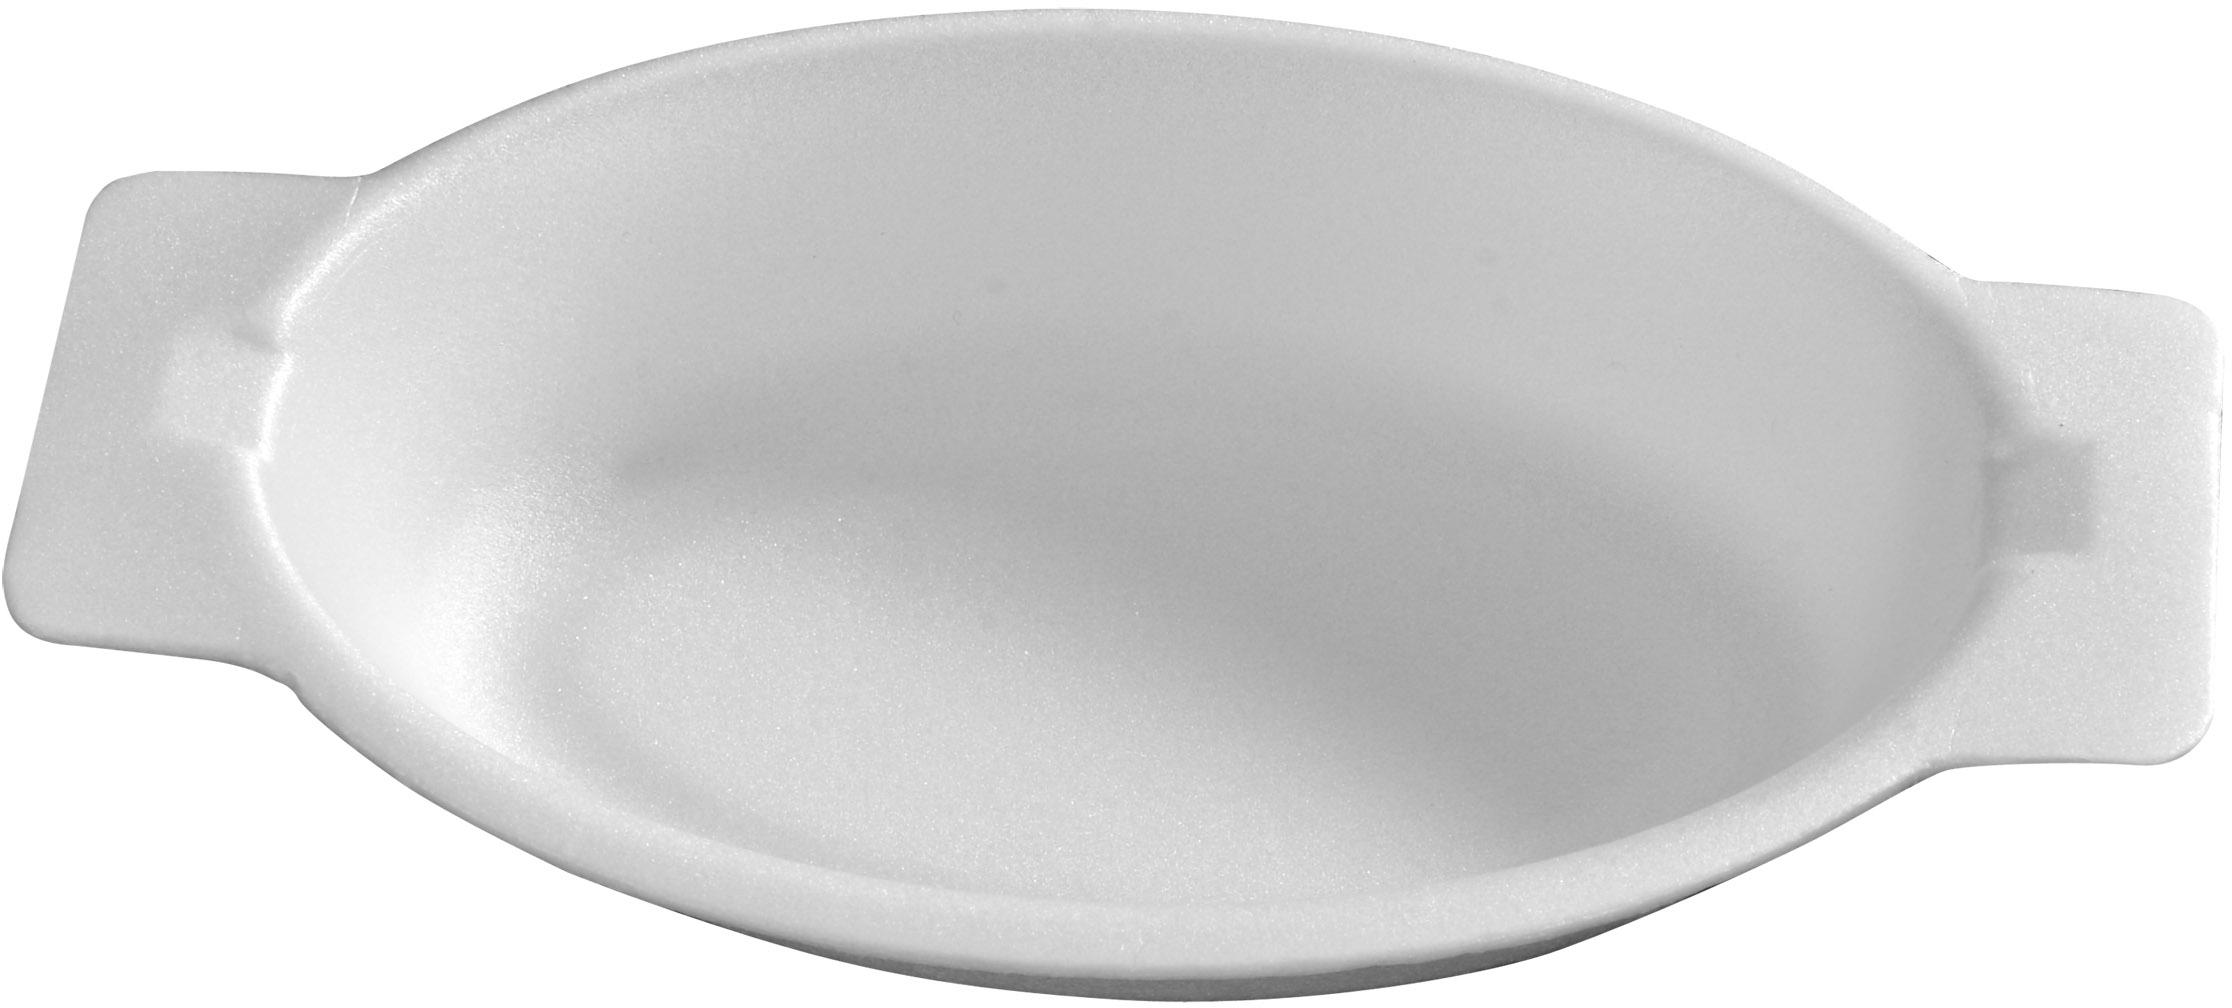 Oval Disposable Bowl